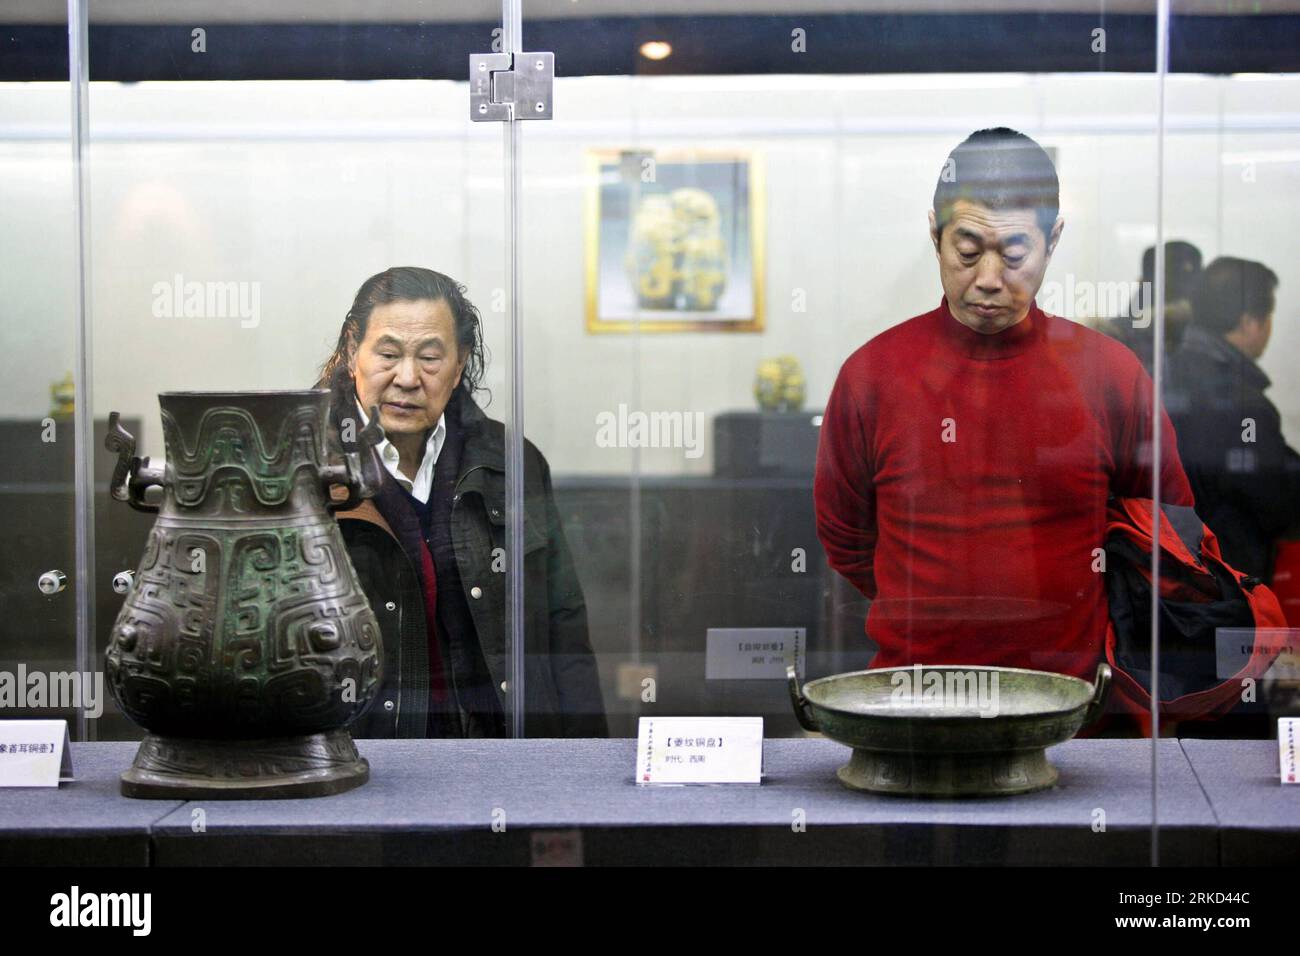 Bildnummer: 54858093  Datum: 20.01.2011  Copyright: imago/Xinhua (110127) -- BEIJING, Jan. 27, 2011 (Xinhua) -- Tourists view artworks from China s Palace Museum in Art Treasures Museum of the Chinese Nation in Beijing, capital of China, Jan. 20, 2011. China s Palace Museum, located inside the Forbidden City, announced on Wednesday that a seven-year inventory, which began in 2004, reveals the museum s collection includes 1,807,558 objects, providing the first accurate appraisal of the size of the museum s collection. (Xinhua/Zhang Chuandong) (ly) CHINA-BEIJING-PALACE MUSEUM-COLLECTION-APPRAISA Stock Photo